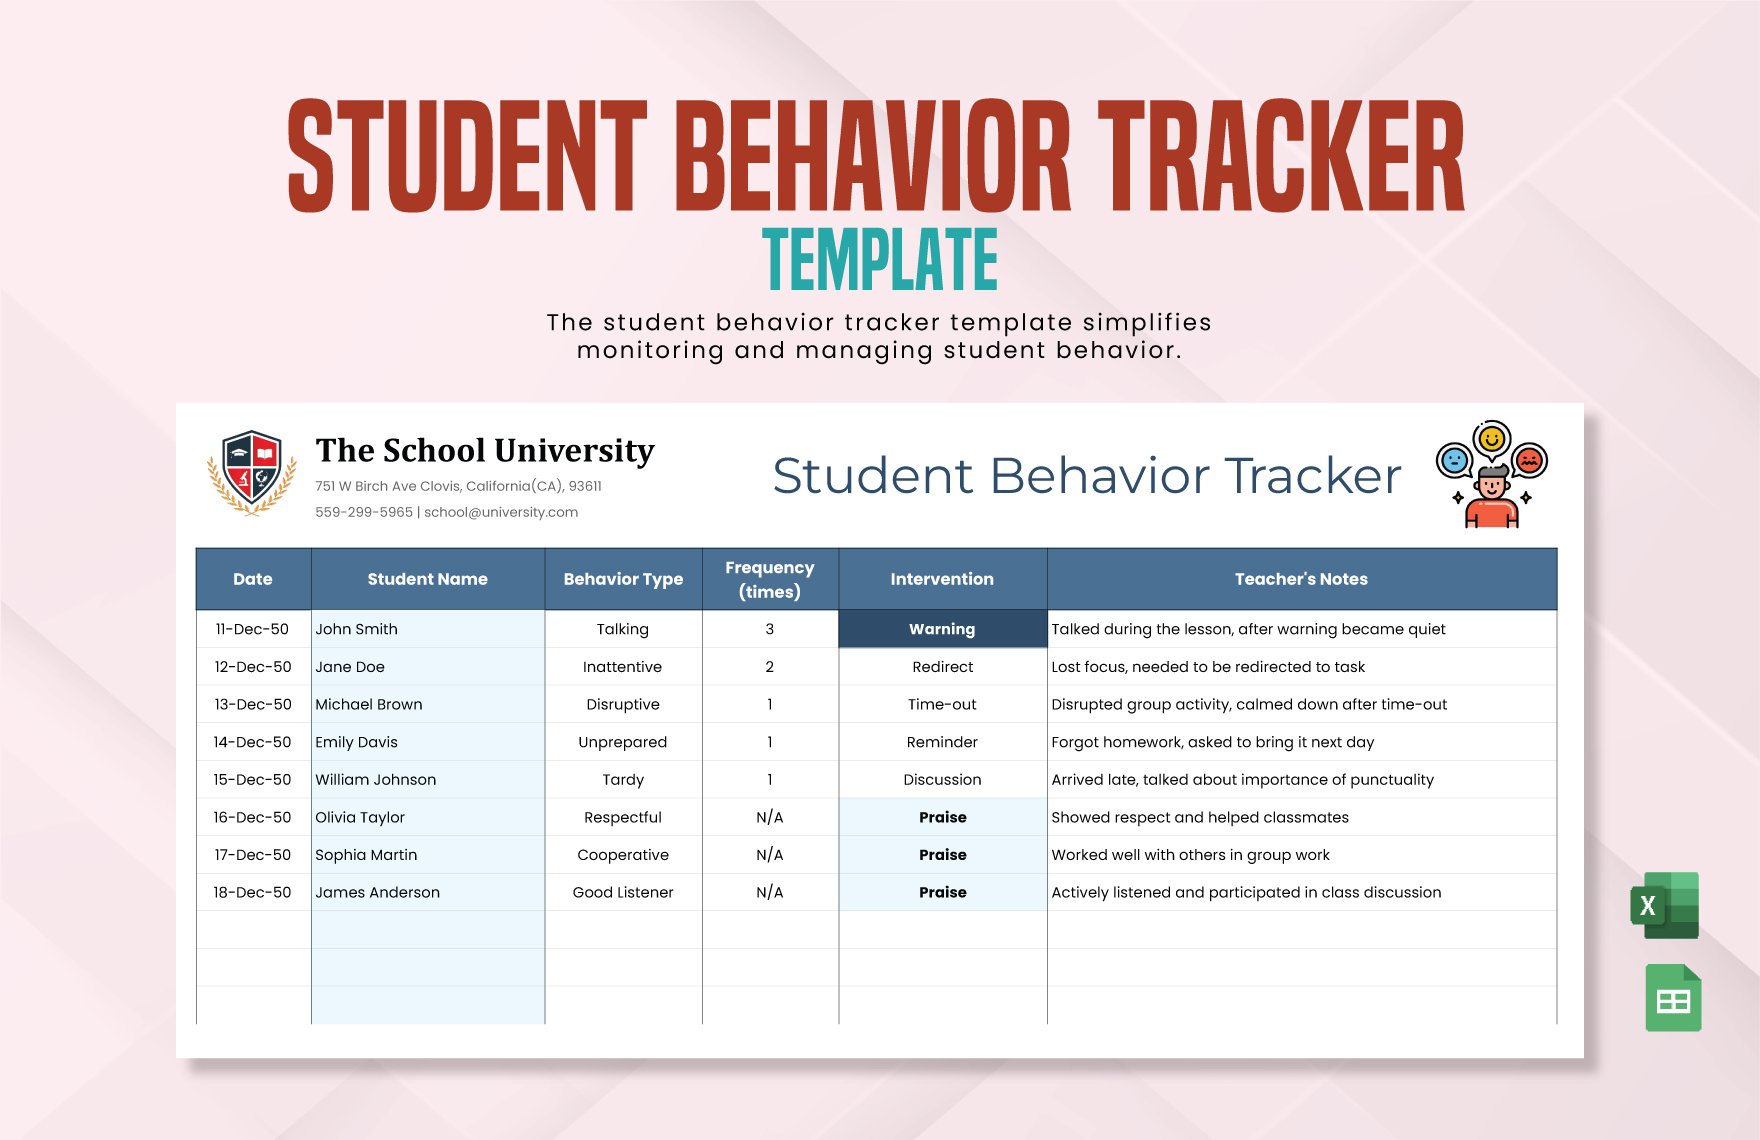 Student Behavior Tracker Template in Excel, Google Sheets